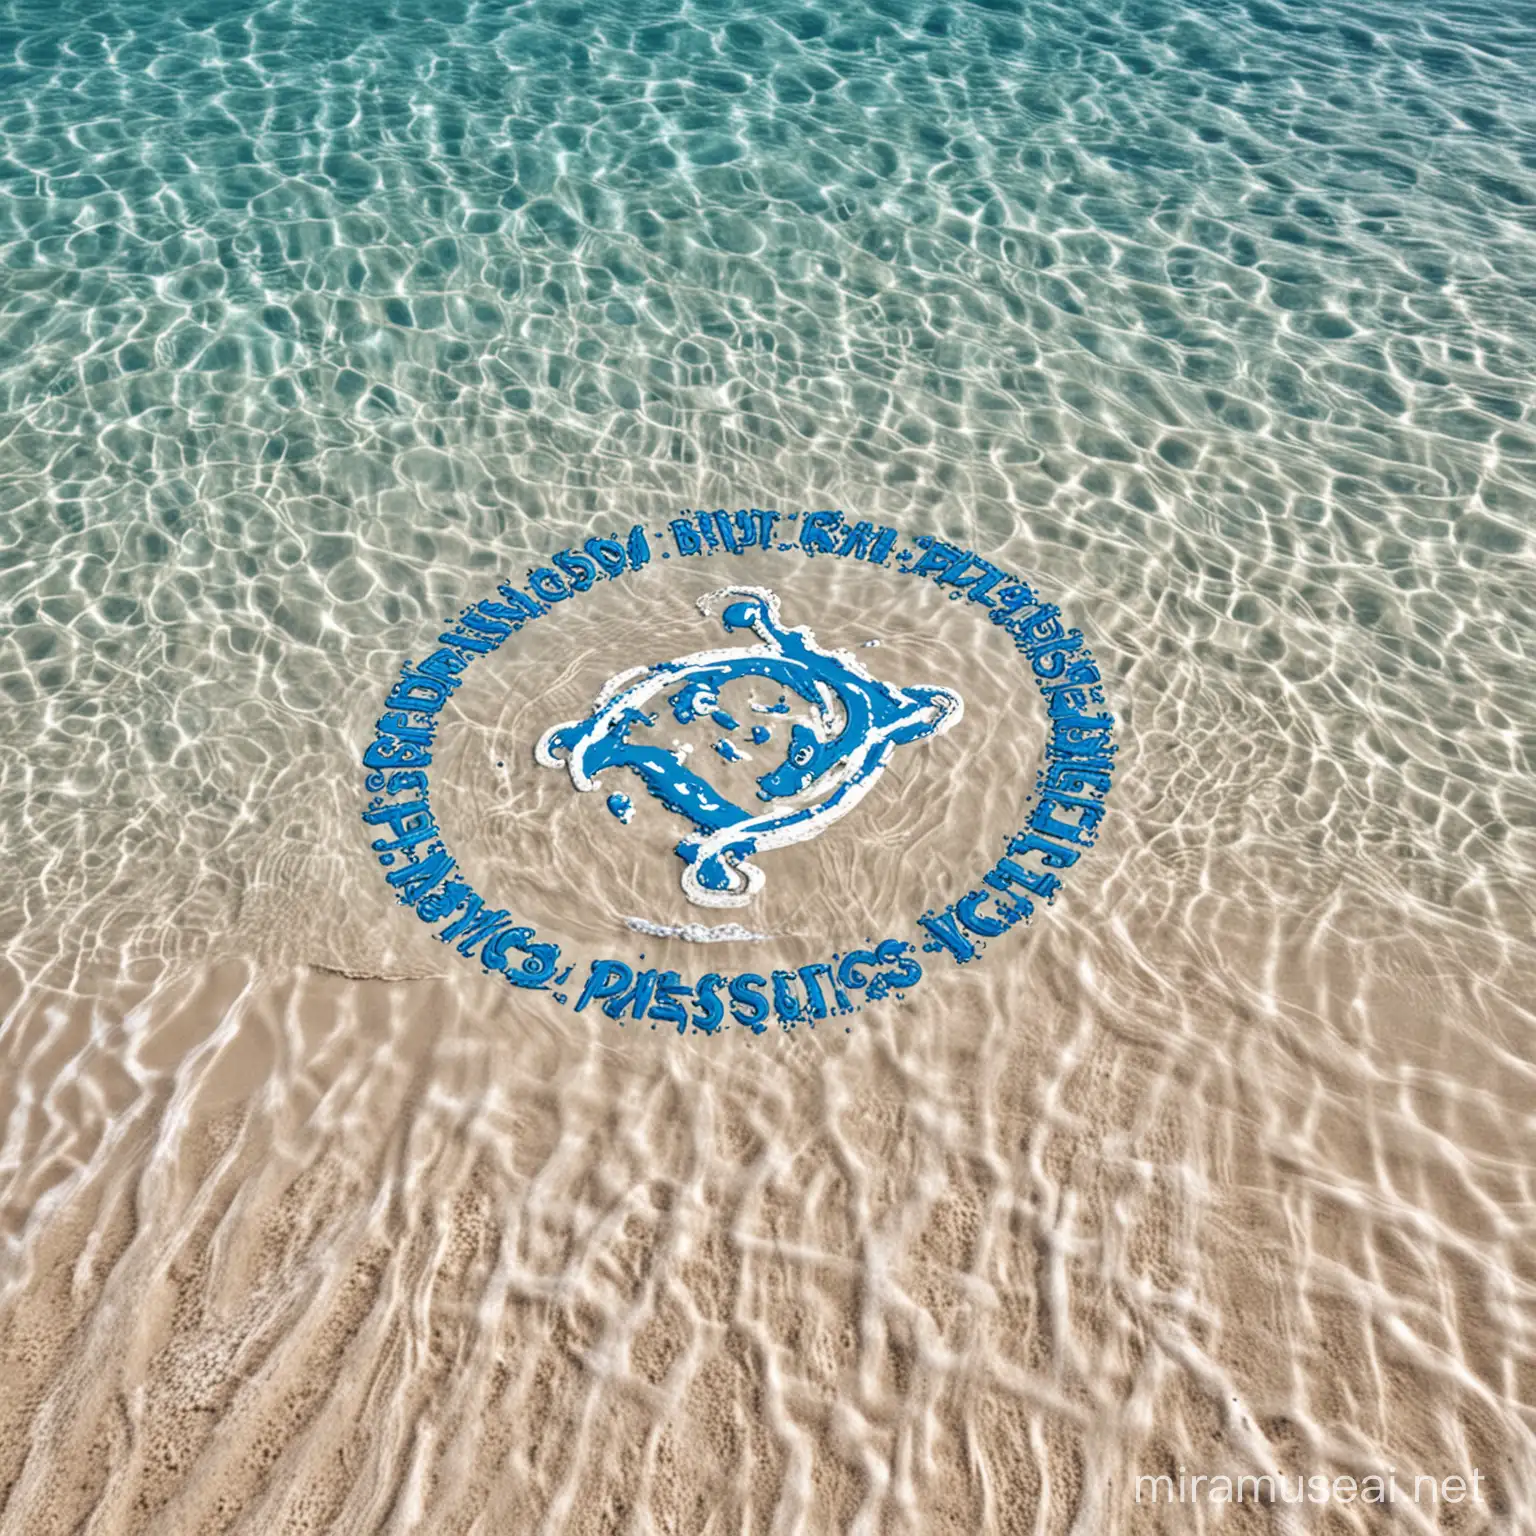 A clean beach with clear blue water and a Poseidon Plastics logo by the side